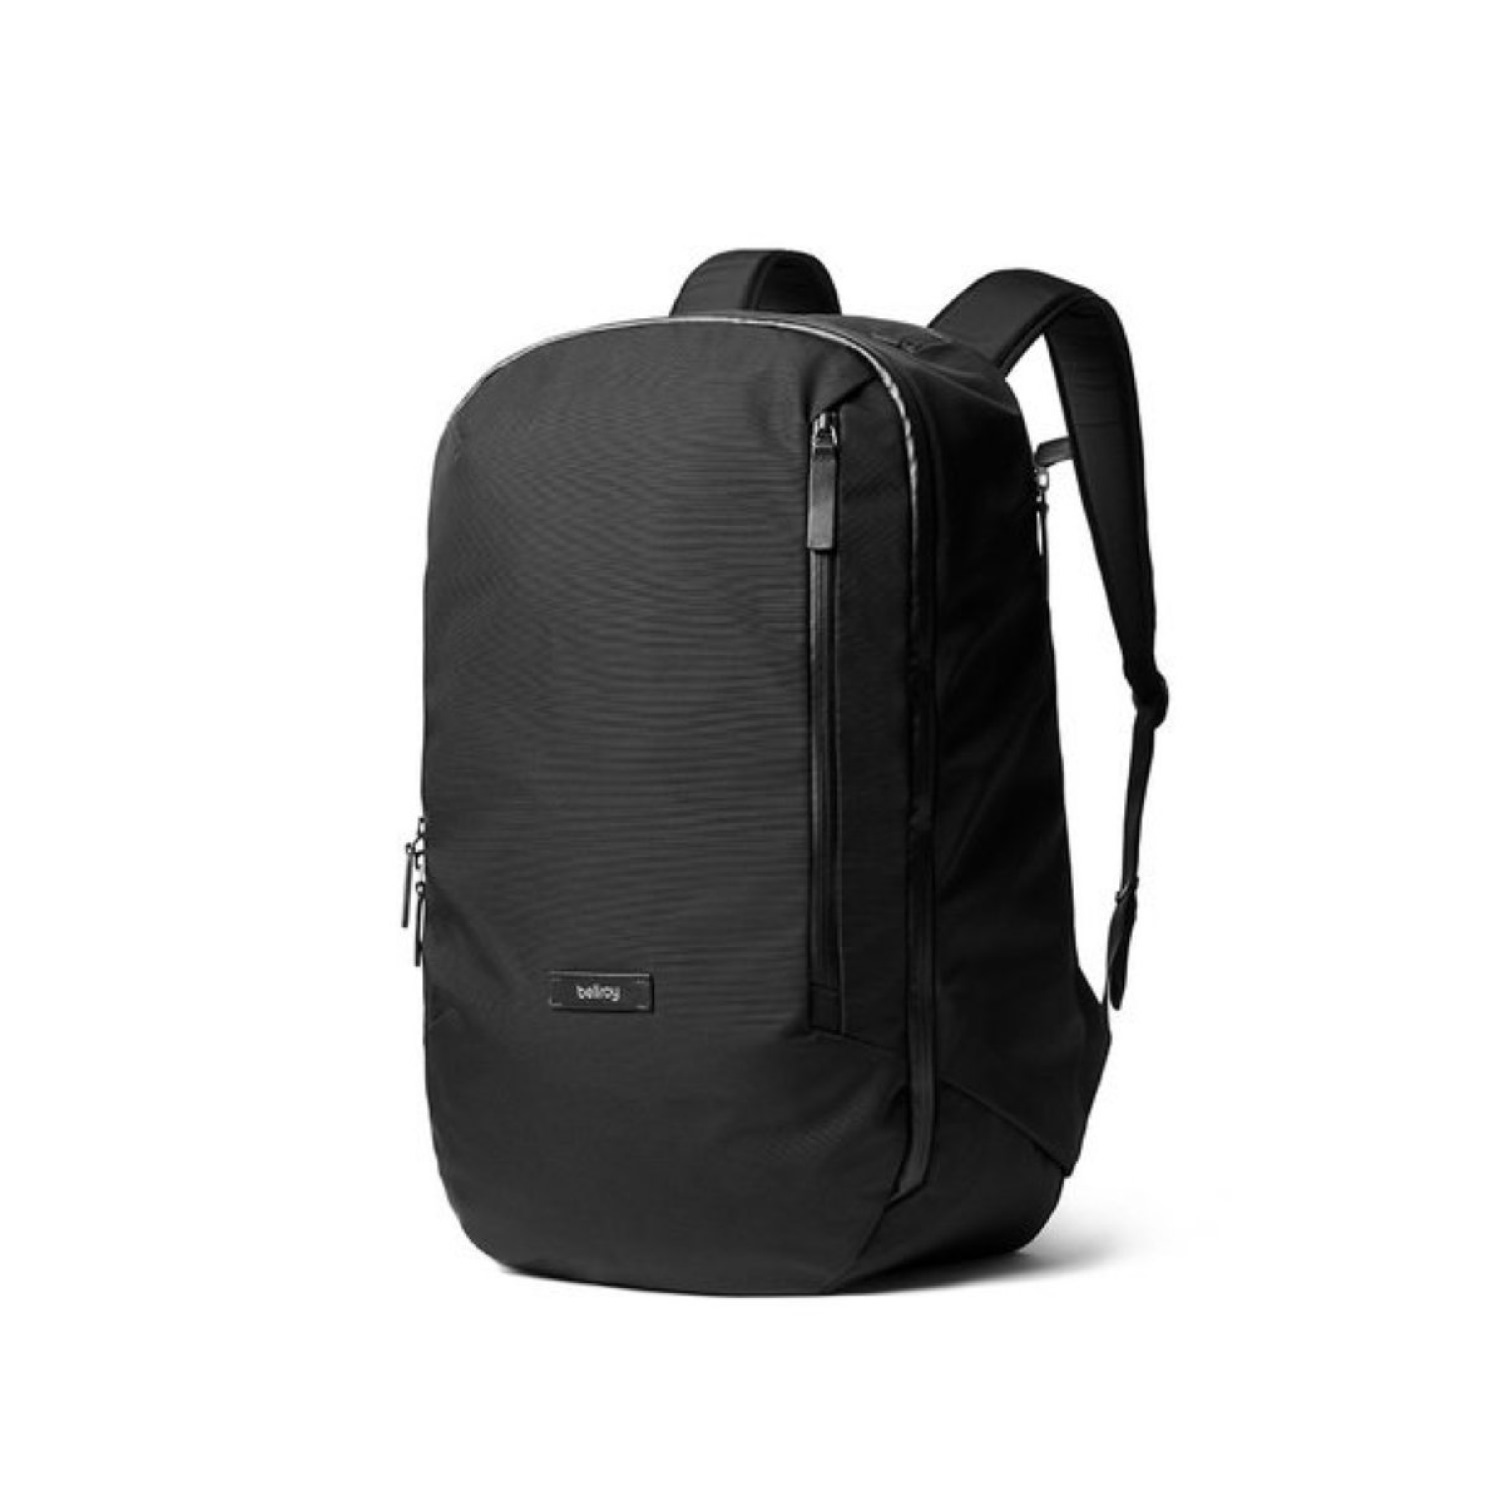 Buy Bellroy Transit Backpack - Black in Singapore & Malaysia - The ...